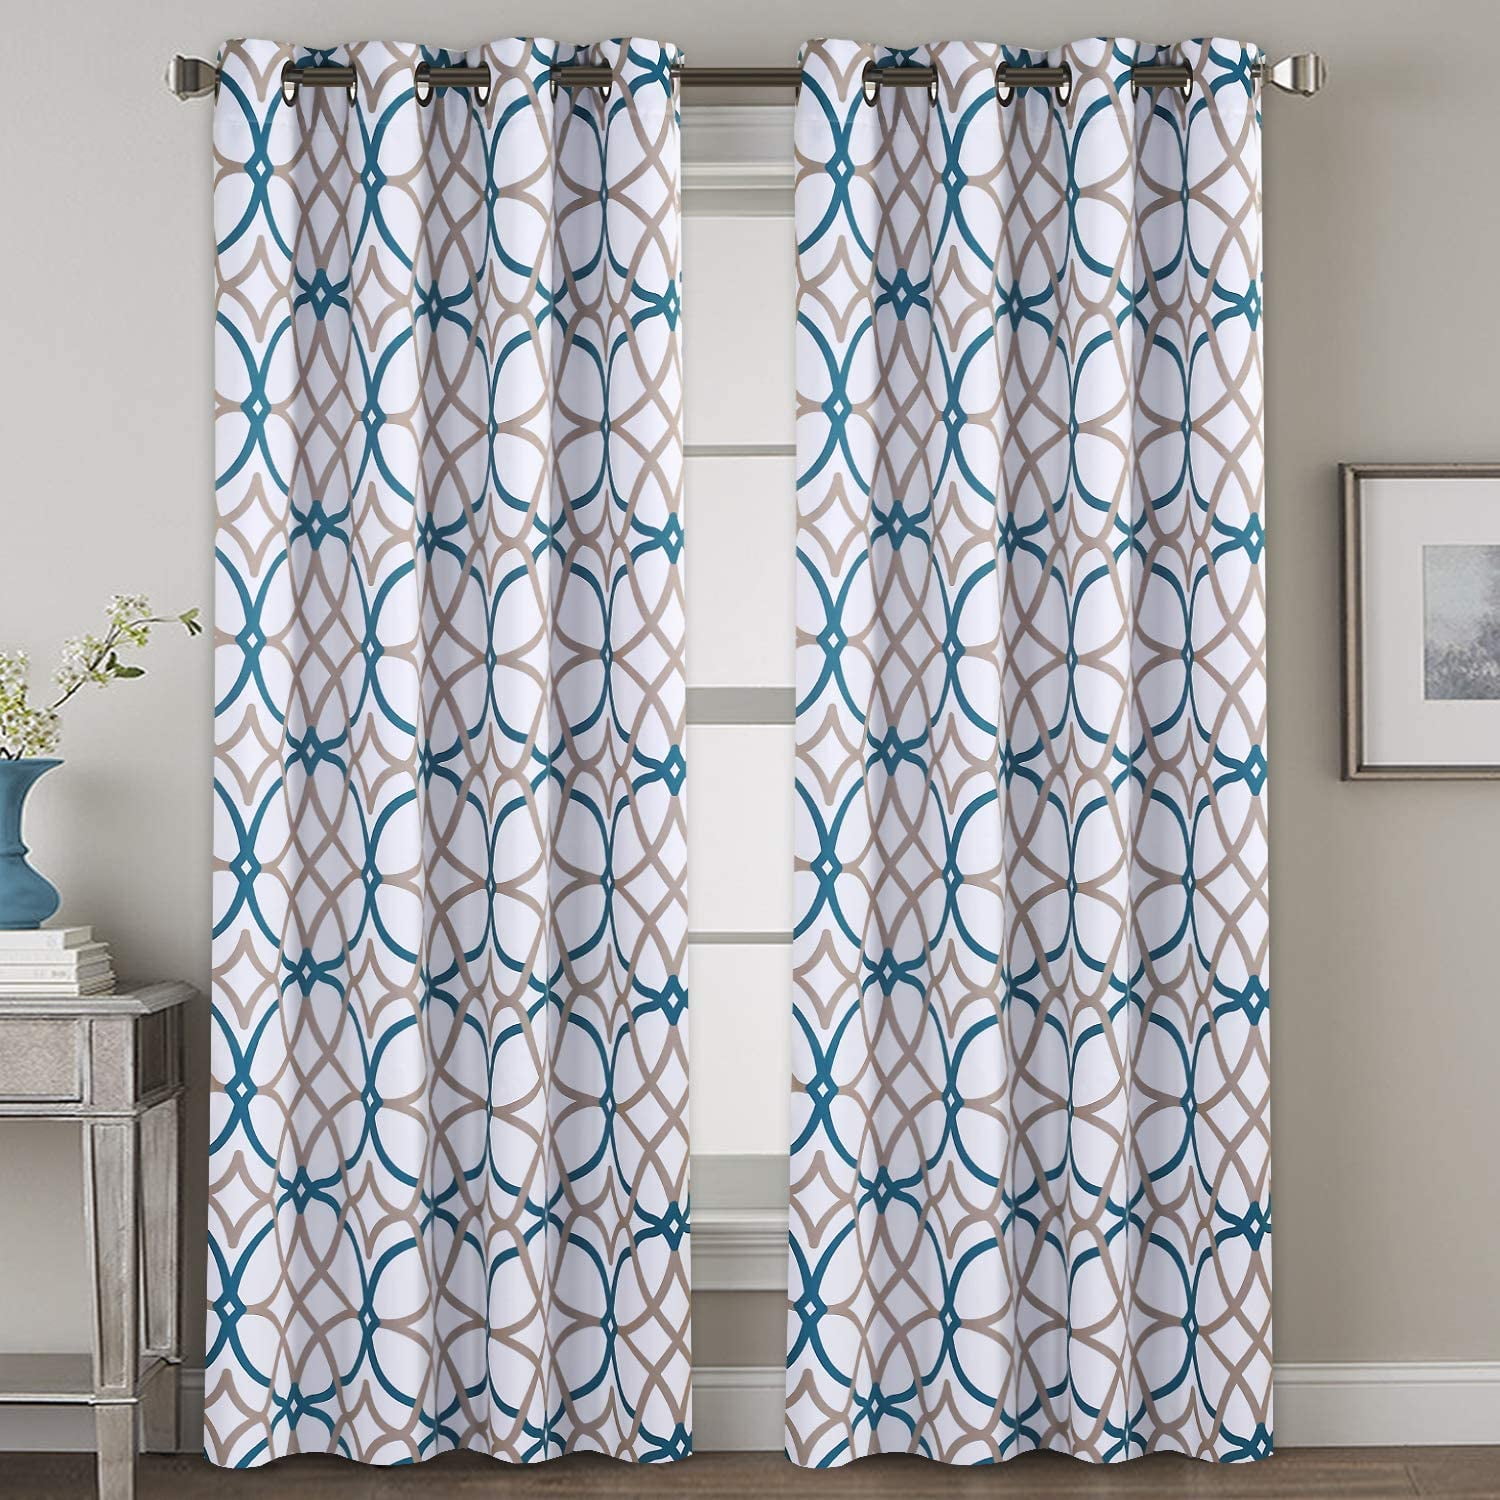 Thermal Insulated Blackout Grommet Curtain Drapes for Living Room-52 inch Width 